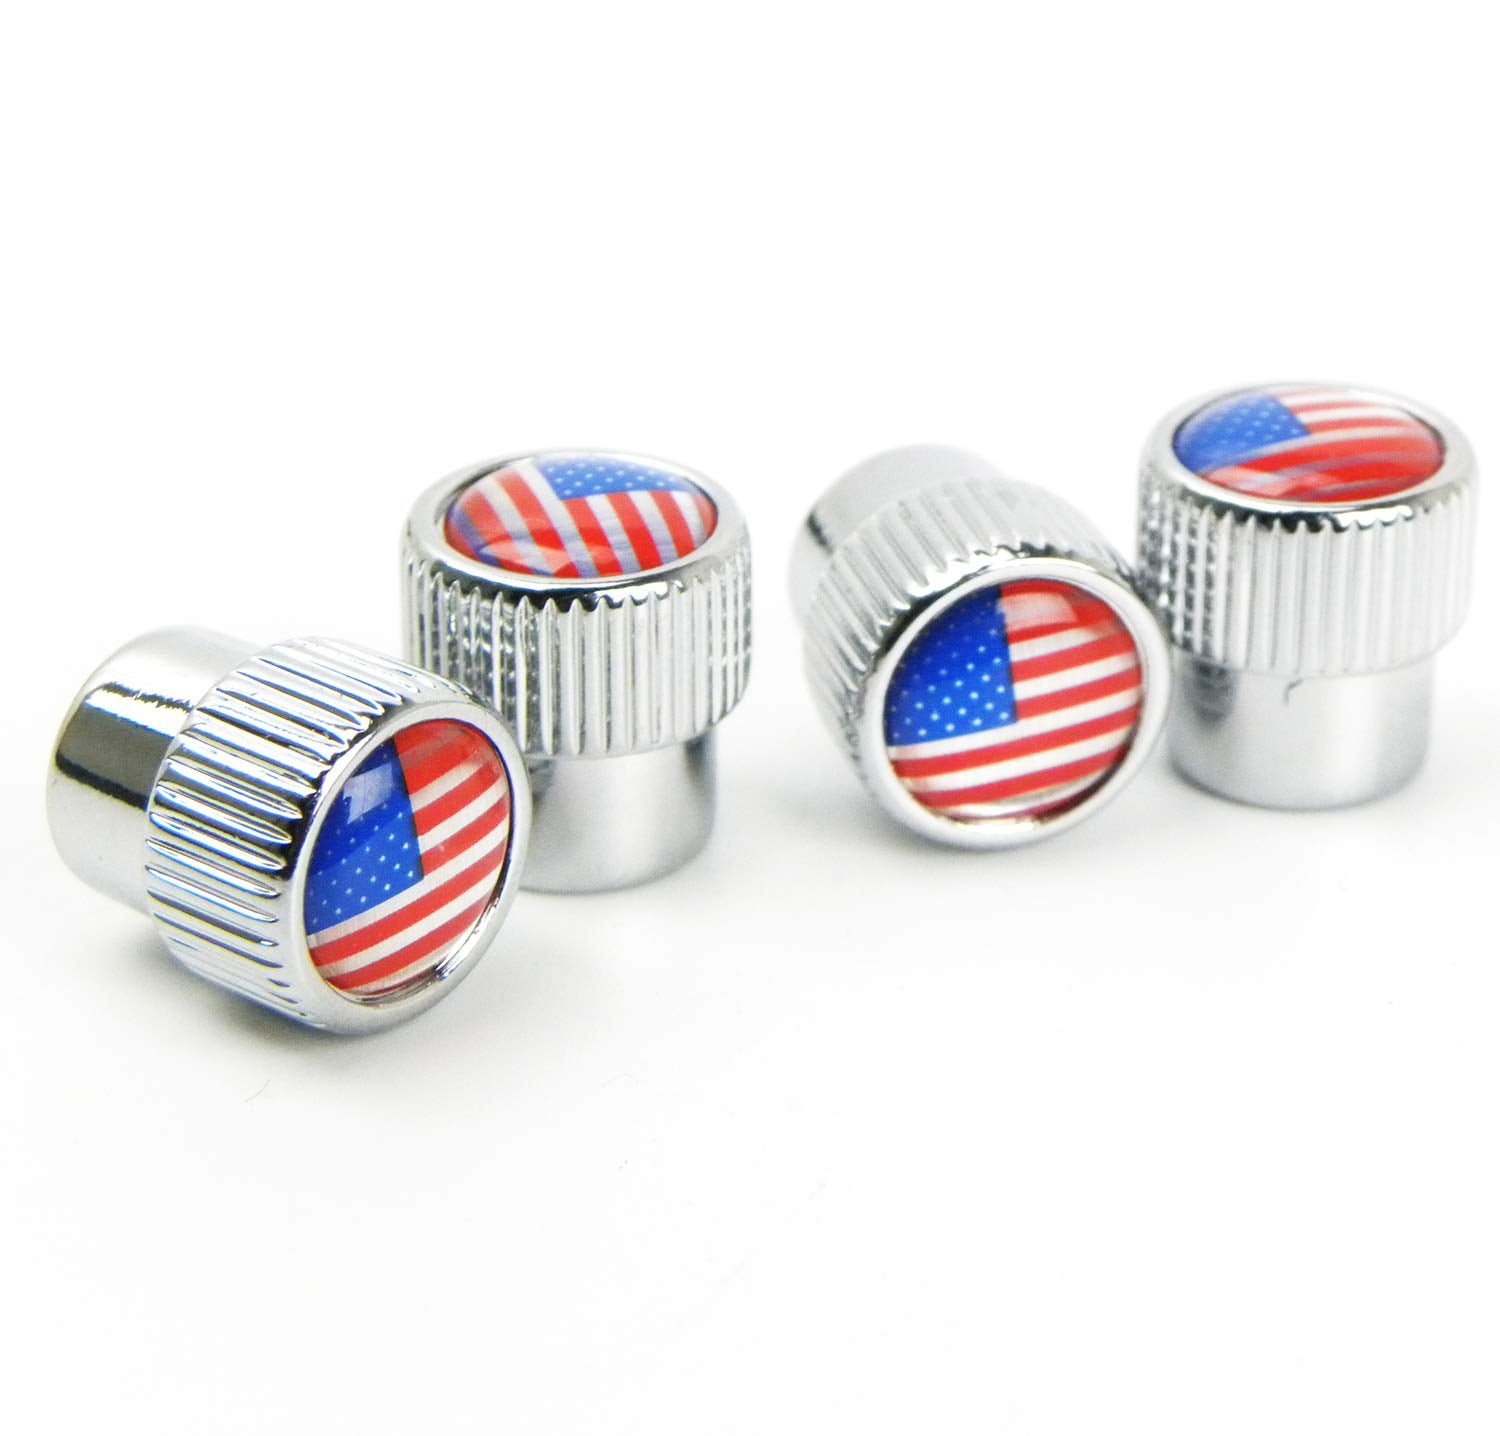 AutoE 5PCS Wheel Tire Valve Caps Stem Covers US United States of America Flag Logo Sticker Car Auto motorcycle Bicycle Accessories